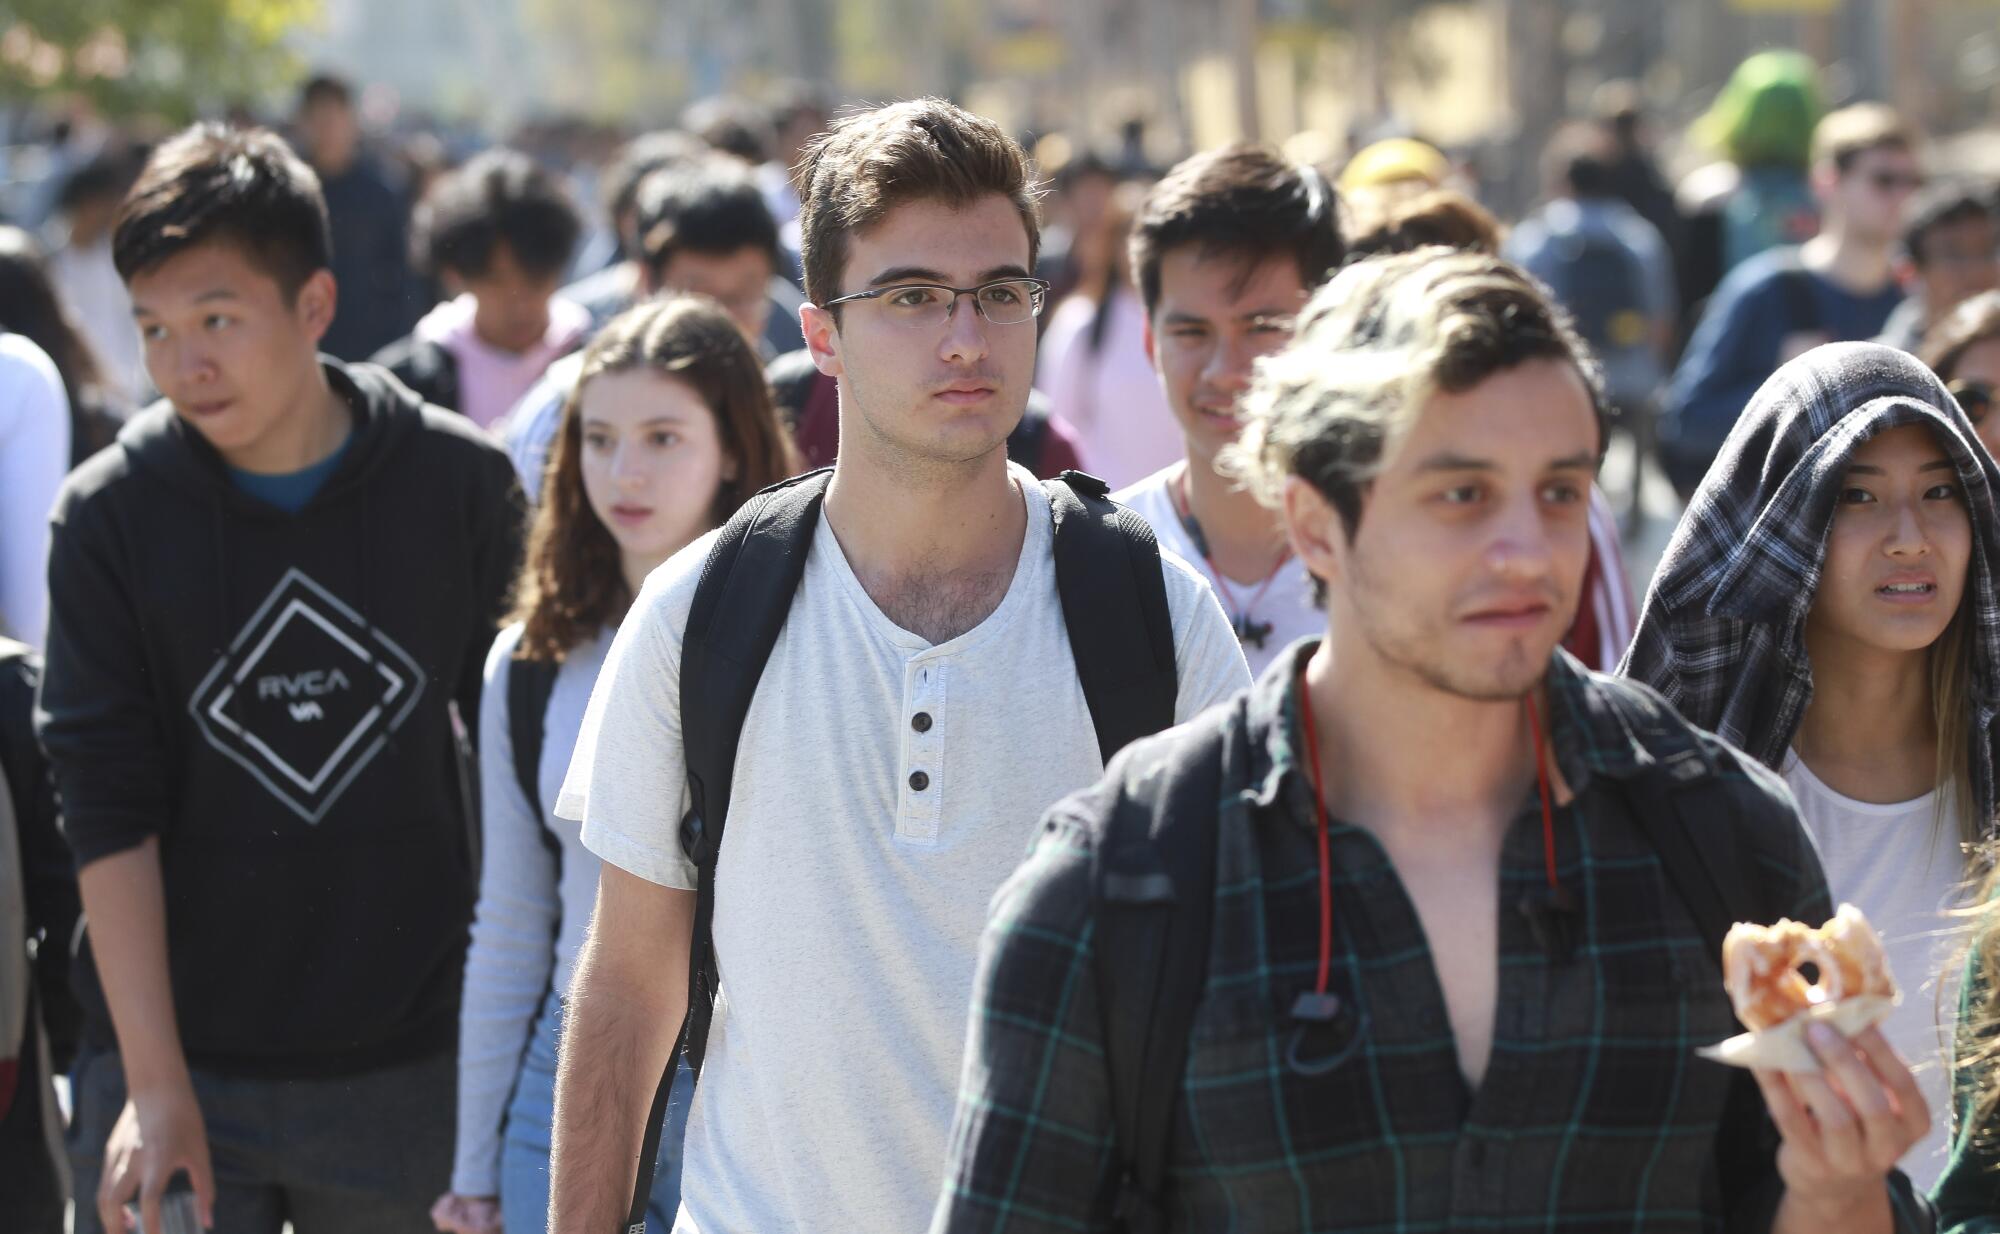 UC San Diego expects to enroll a record 44,000 students this fall.